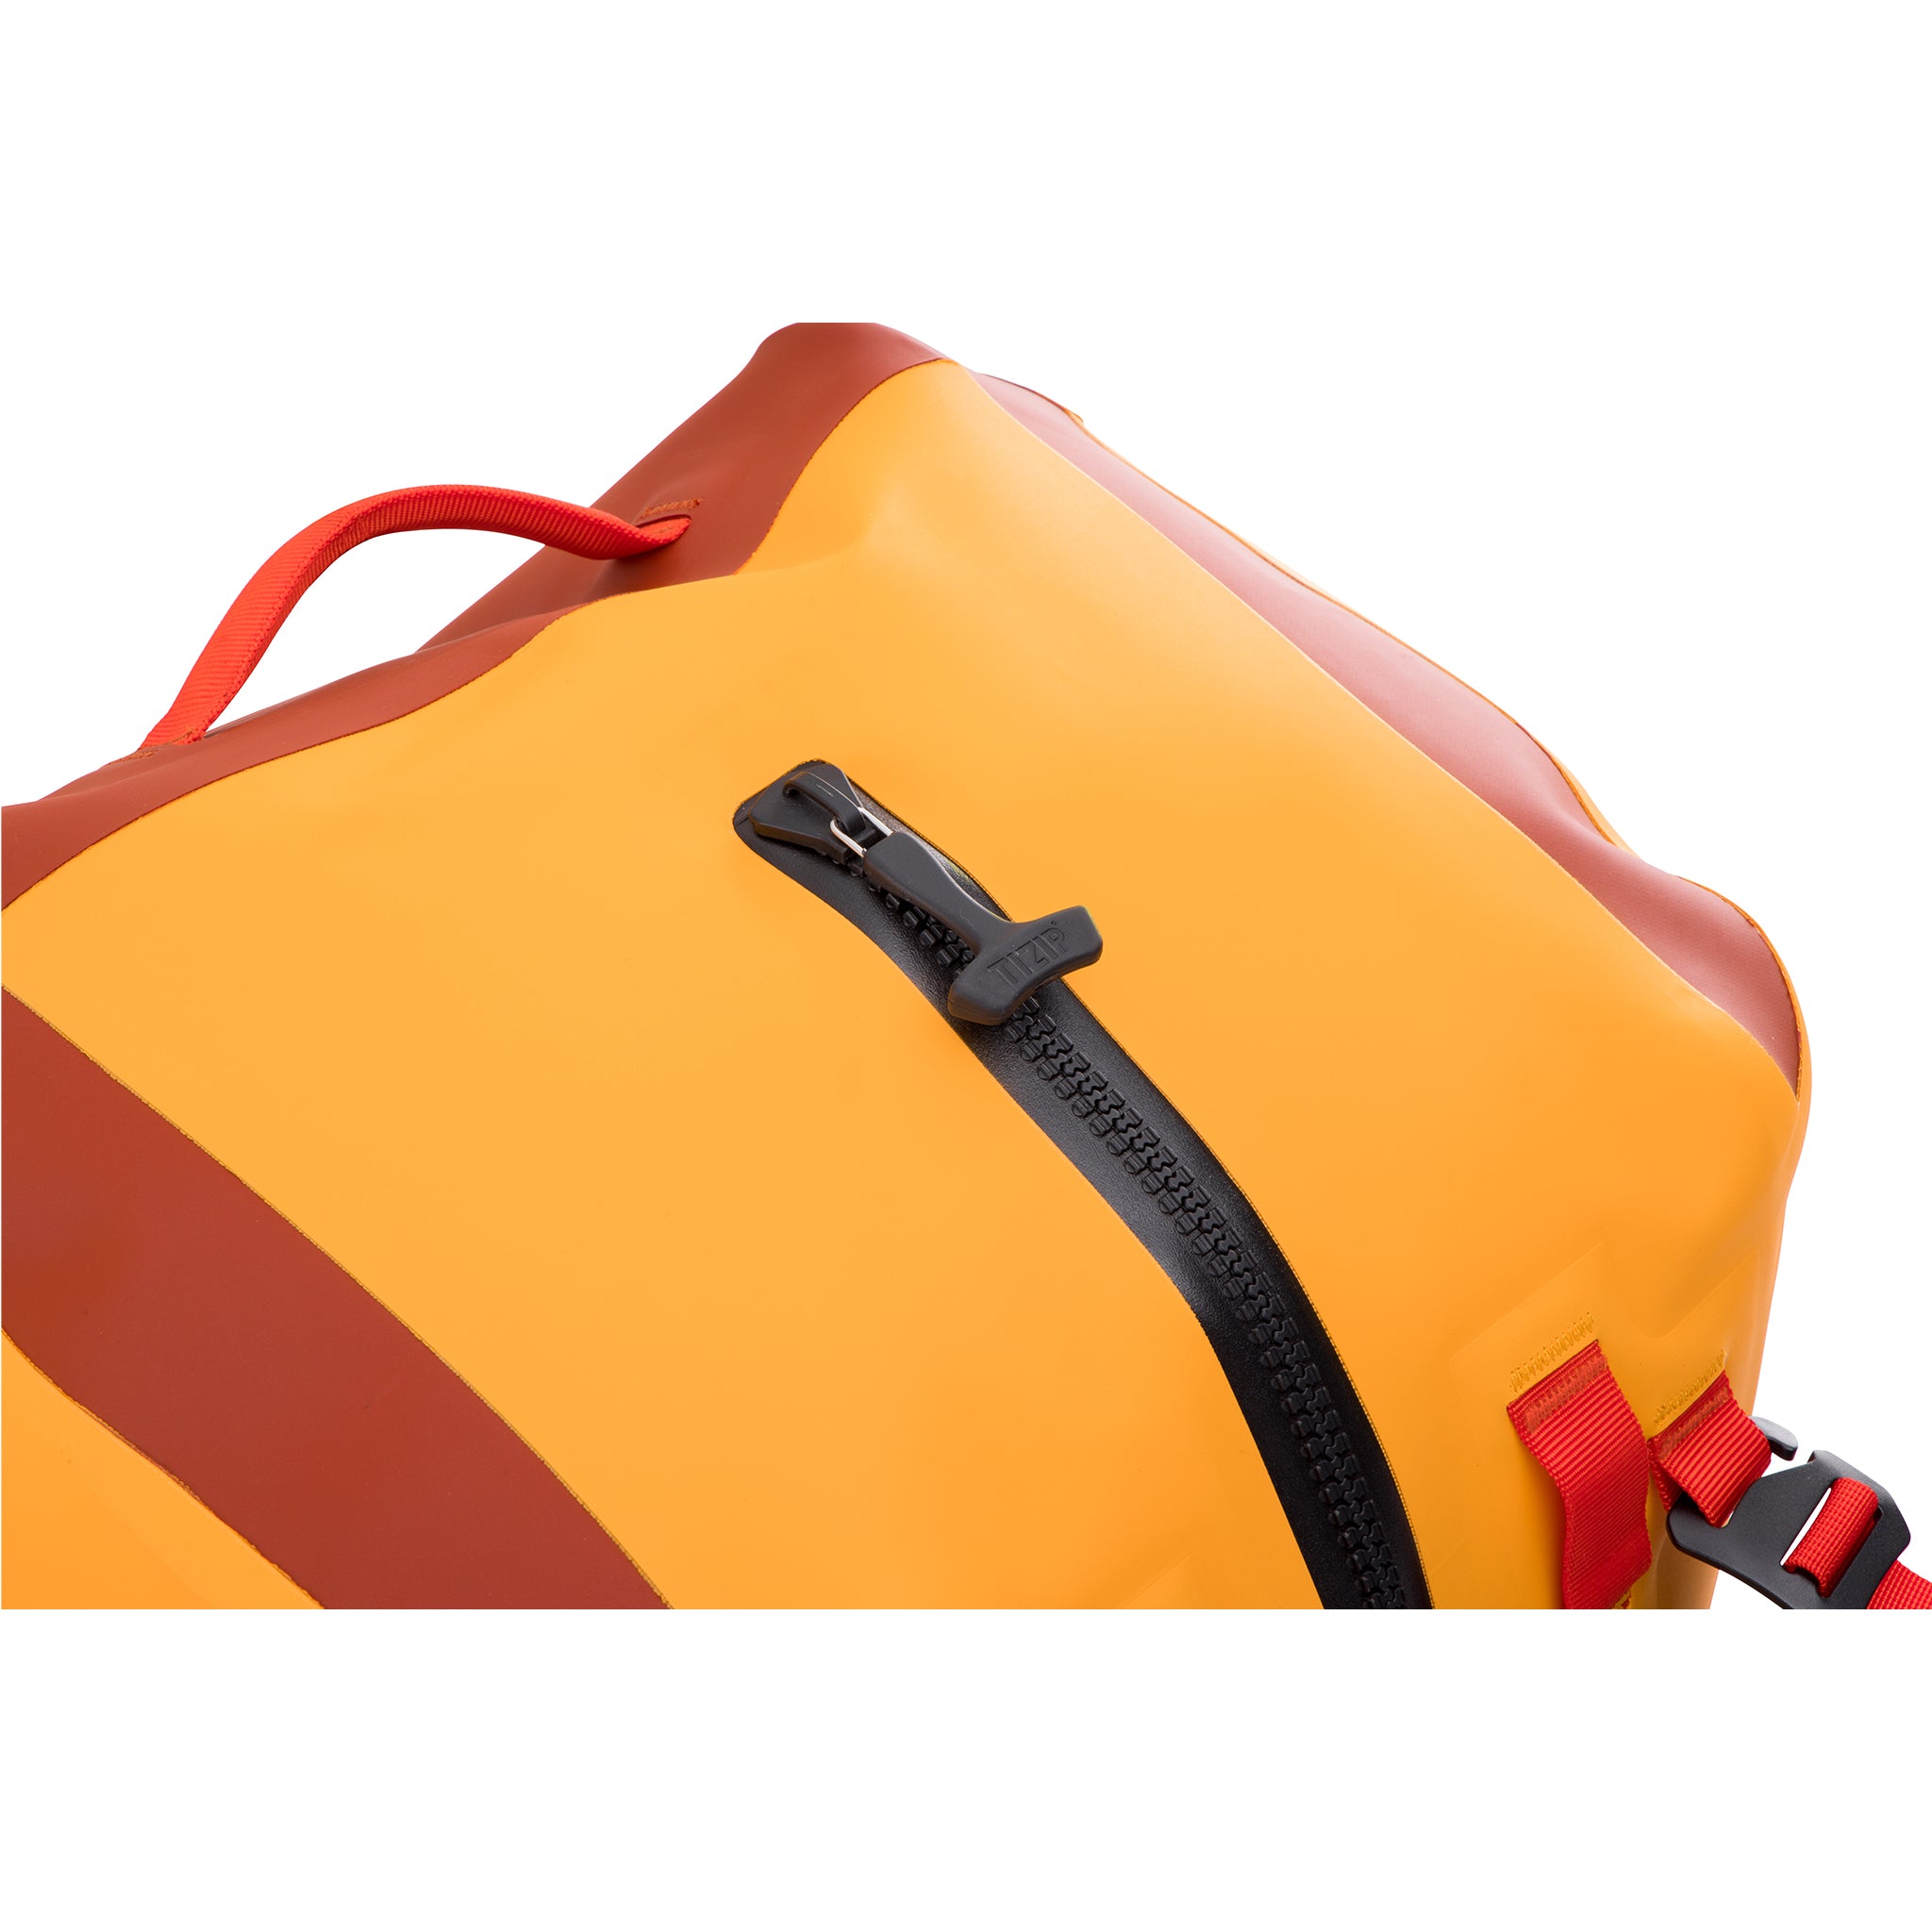 Sea to Summit, Hydraulic Dry Bag [Paddling Buyer's Guide]